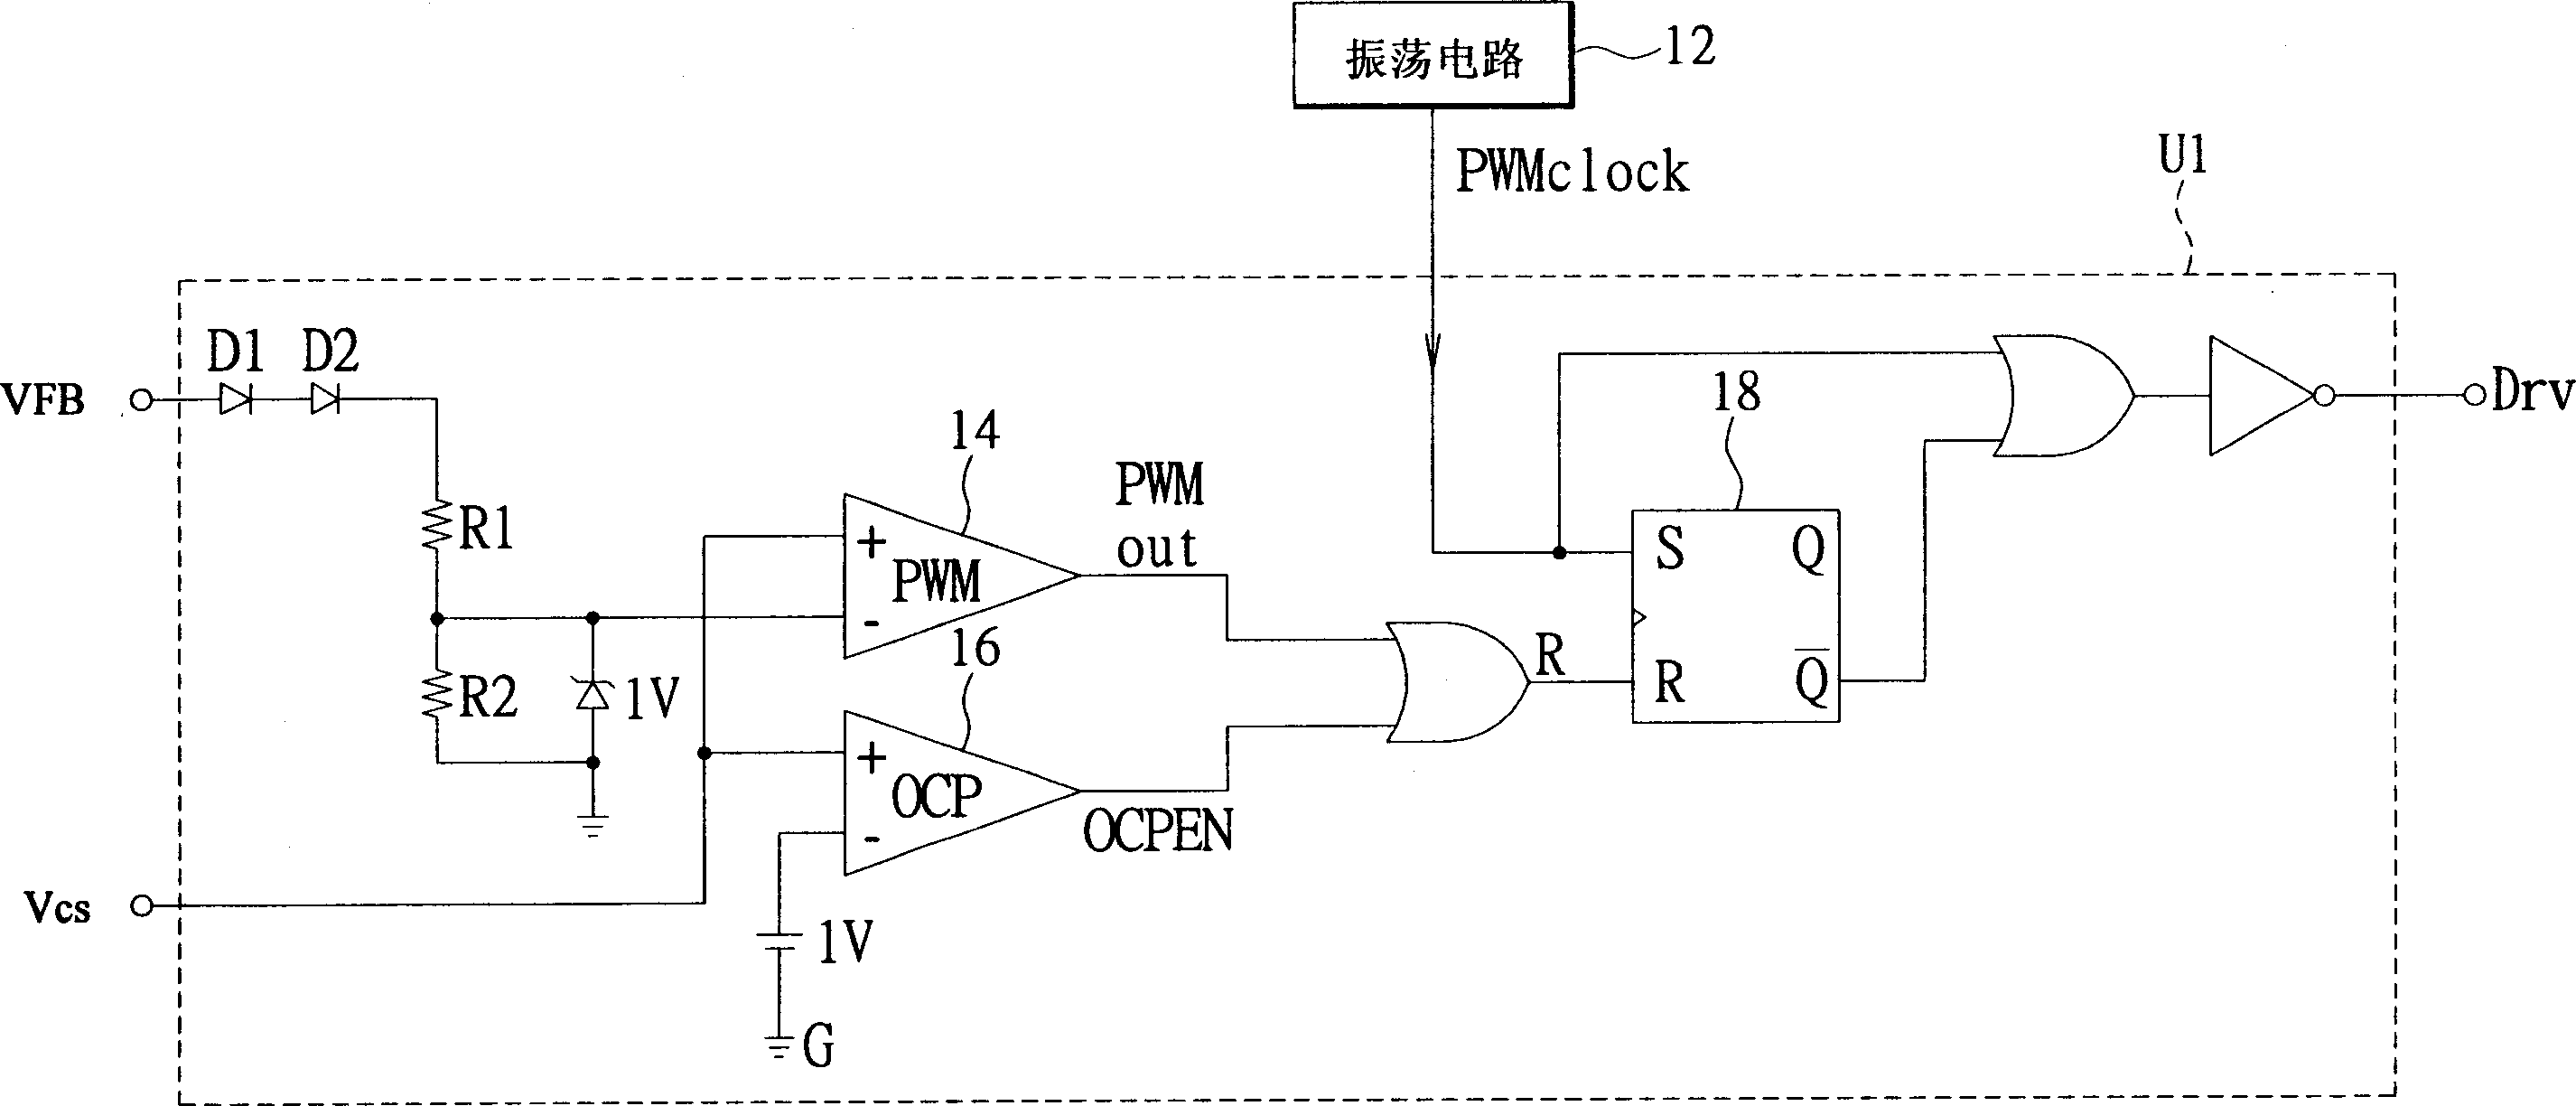 Pulsewidth modulator for controlling electricity saving mode by output voltage feedback delay circuit